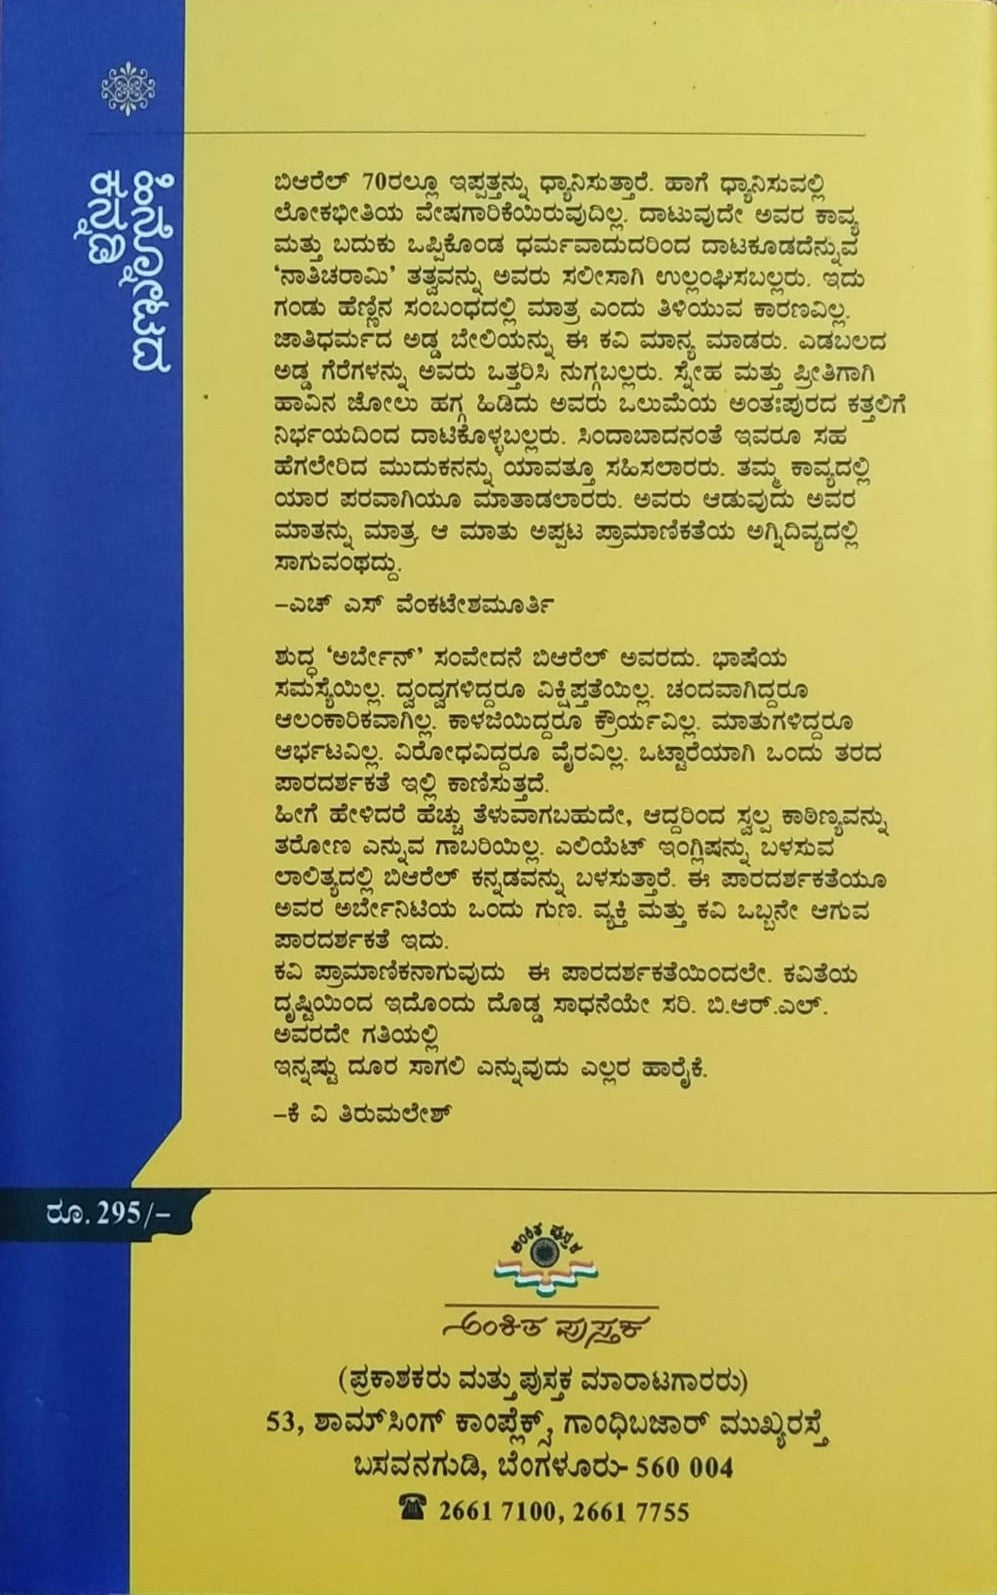 Hinnotada Kannadi is a book of Poems Written by B. R. Lakshmanrao and Edited by H. S. Venkateshamurthy and Published by Ankita Pustaka